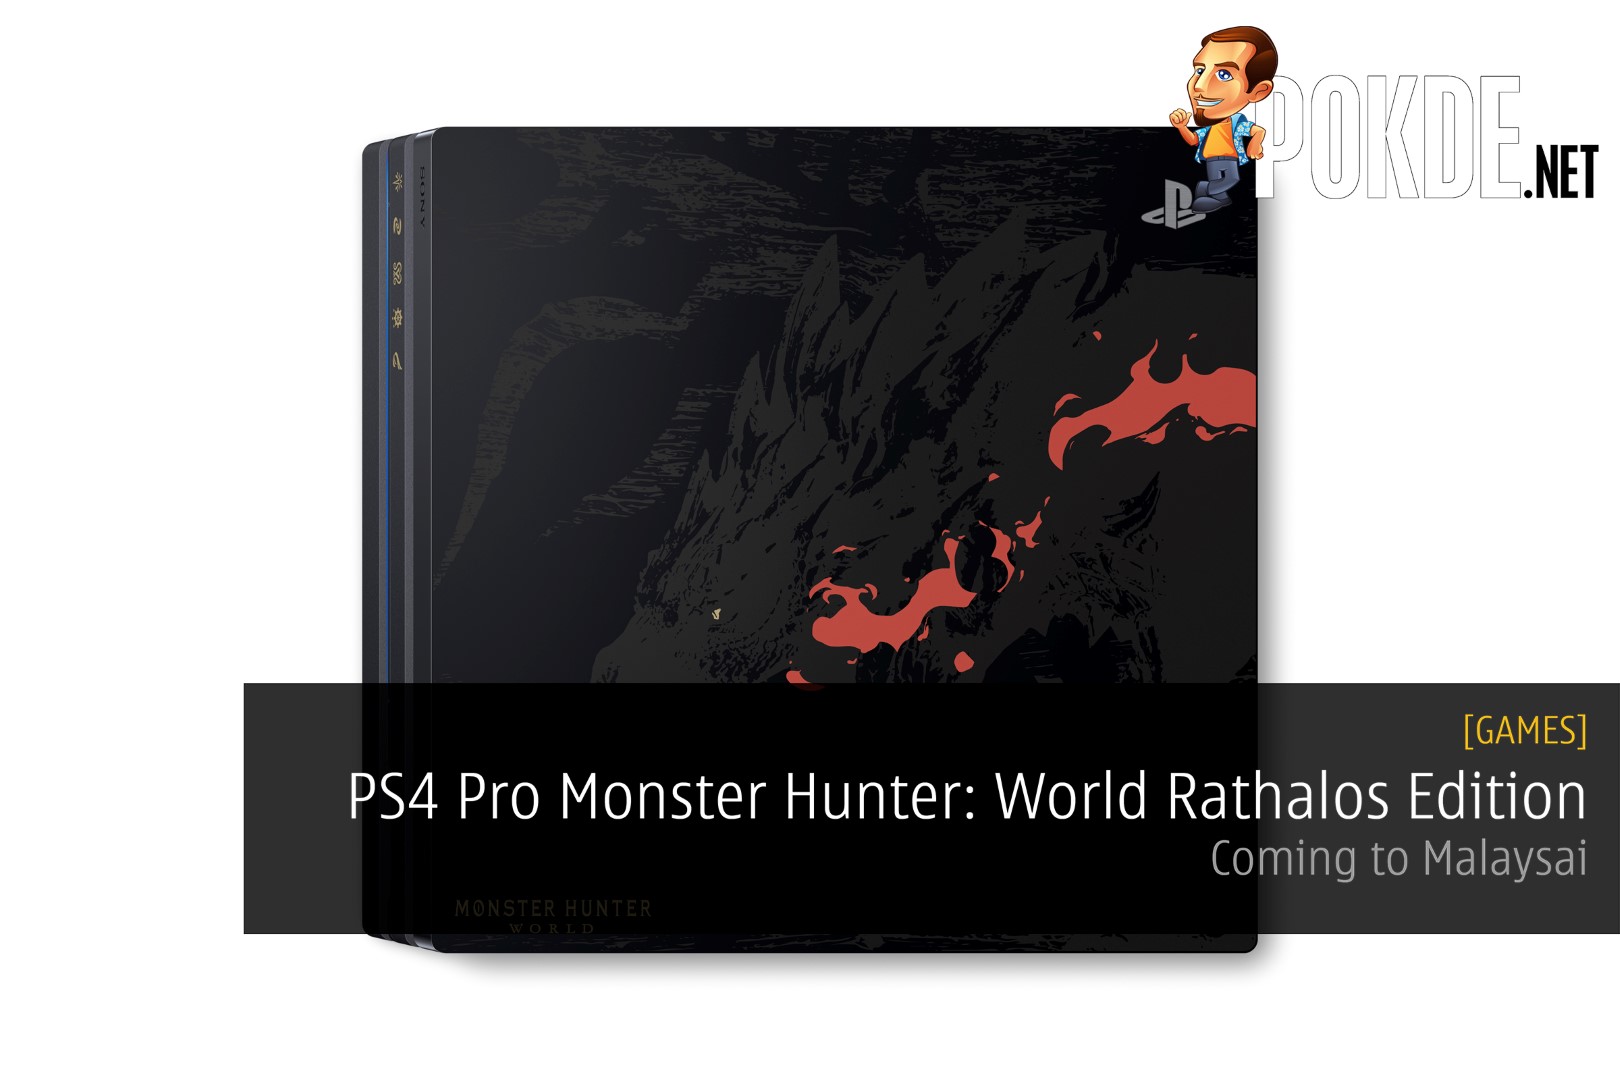 PS4 Pro Monster Hunter: World Rathalos Edition Is Coming To Malaysia! 32